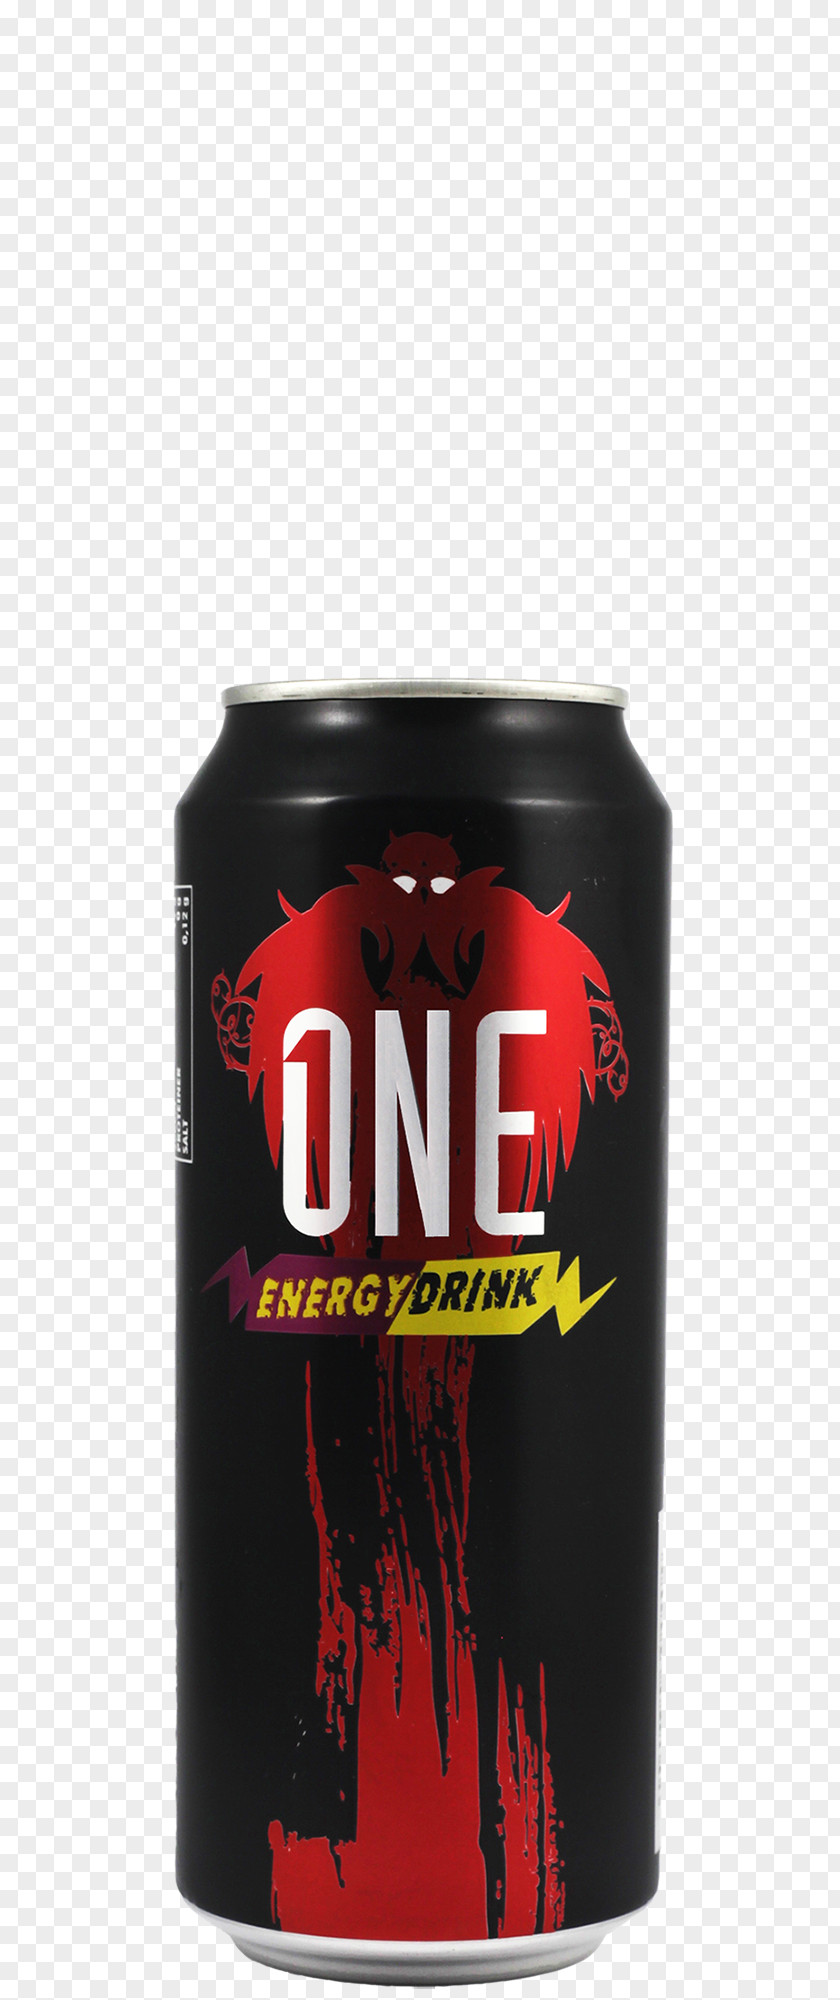 No Energy Drink Fizzy Drinks Drinking PNG